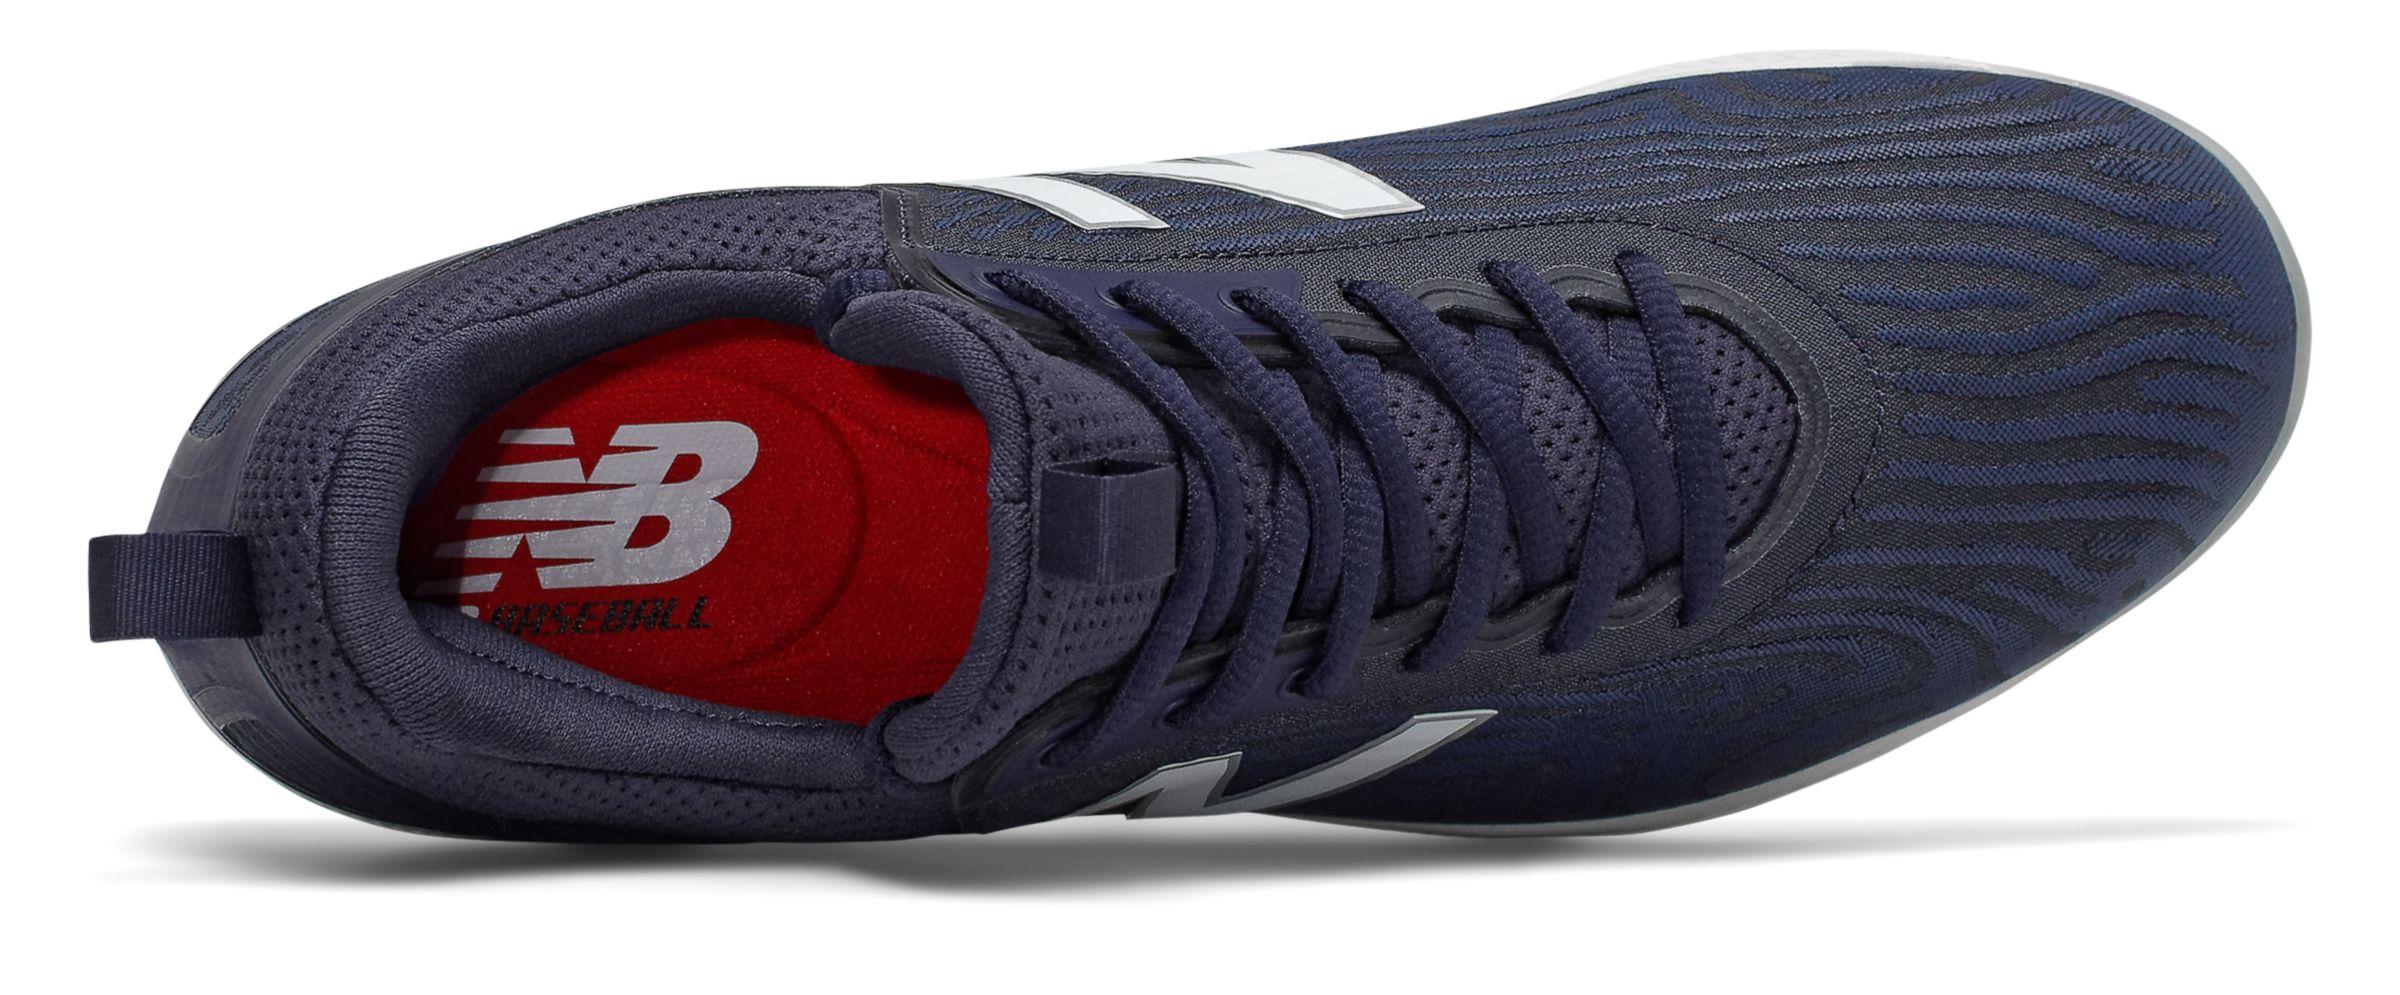 New Balance Fuelcell Compv2 in Blue/Navy (Blue) for Men - Lyst